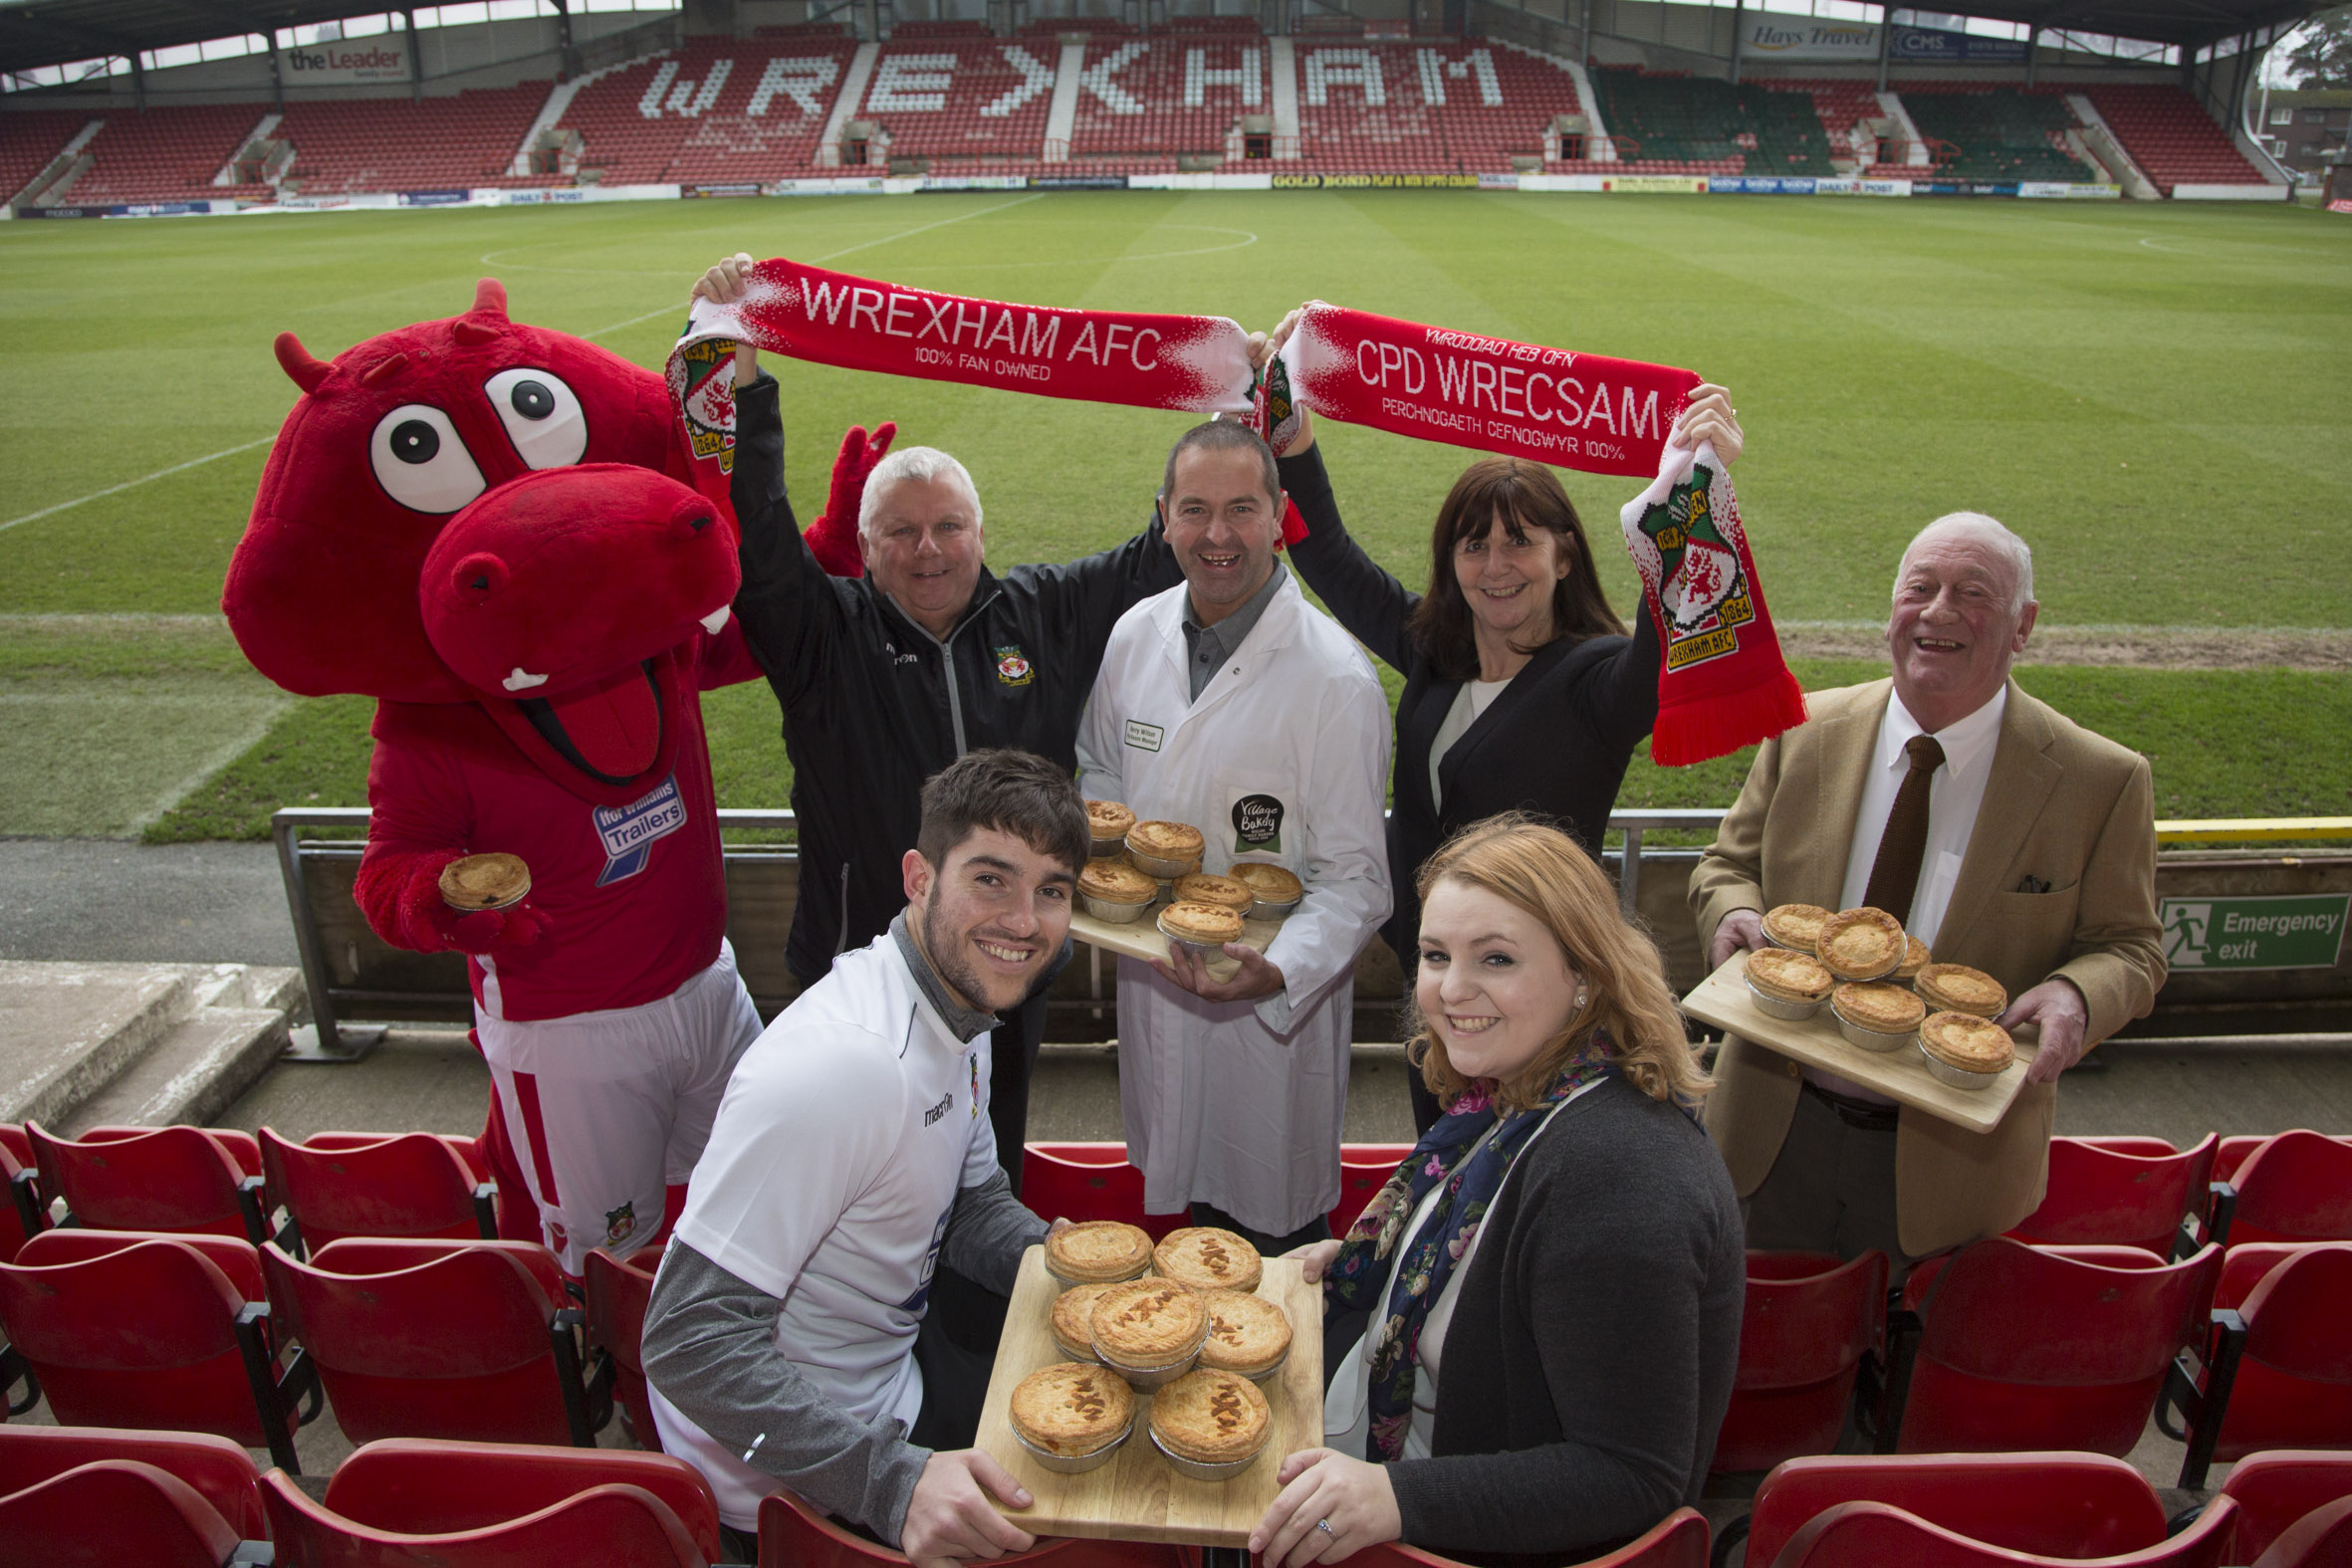 New hot chilli beef club pie will put fire in the Dragons’ bellies